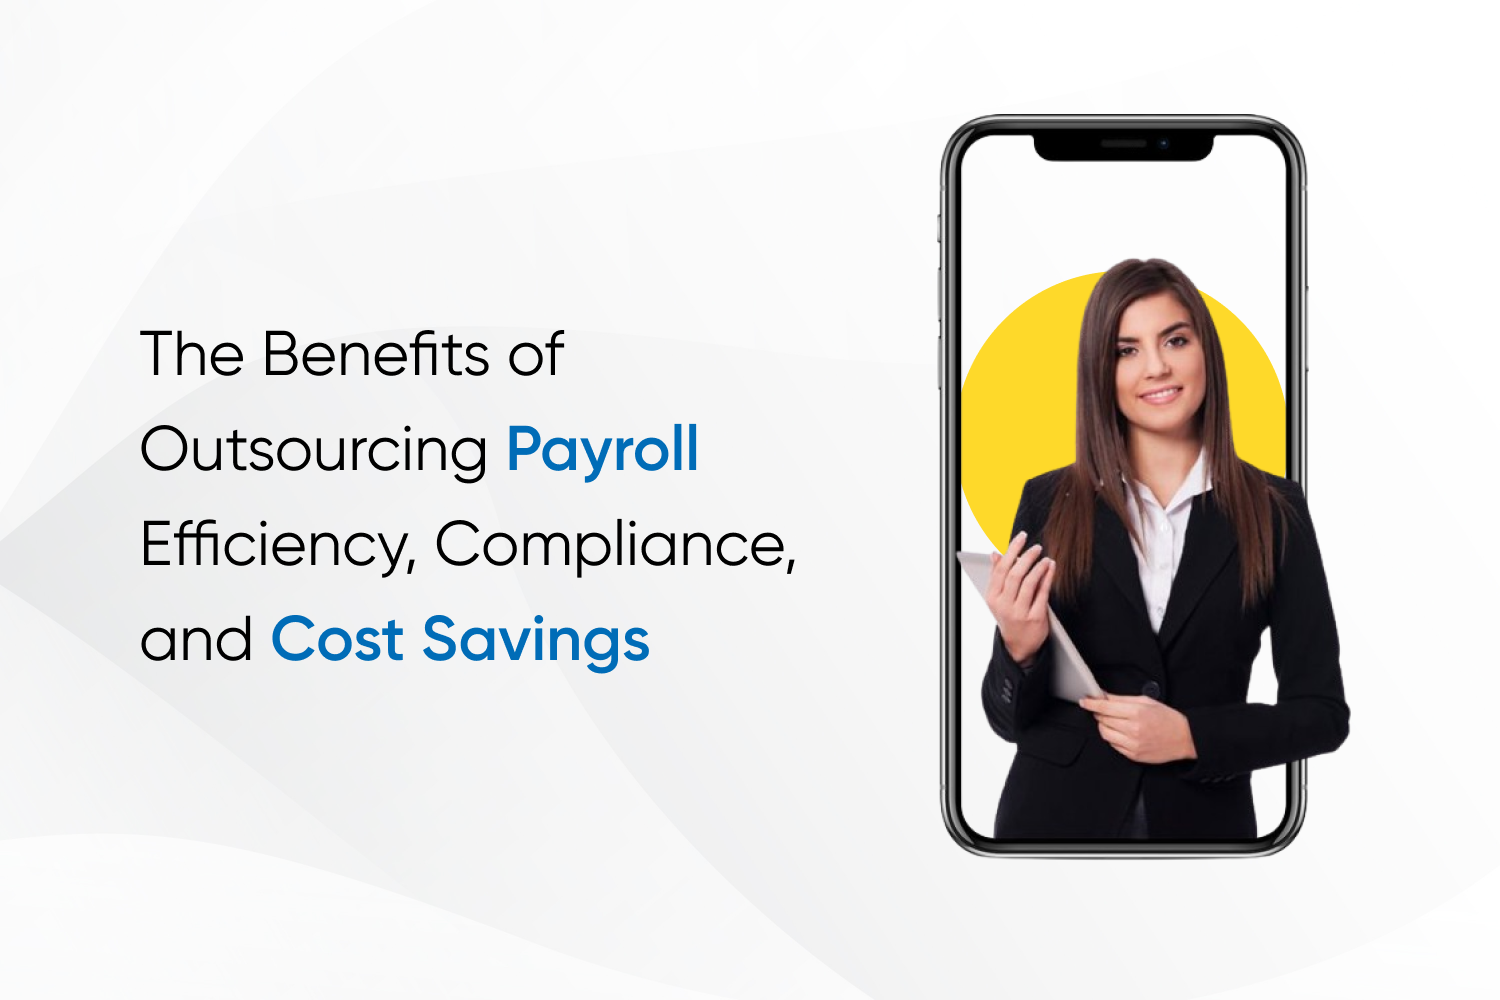 The Benefits of Outsourcing Payroll Efficiency, Compliance, and Cost Savings